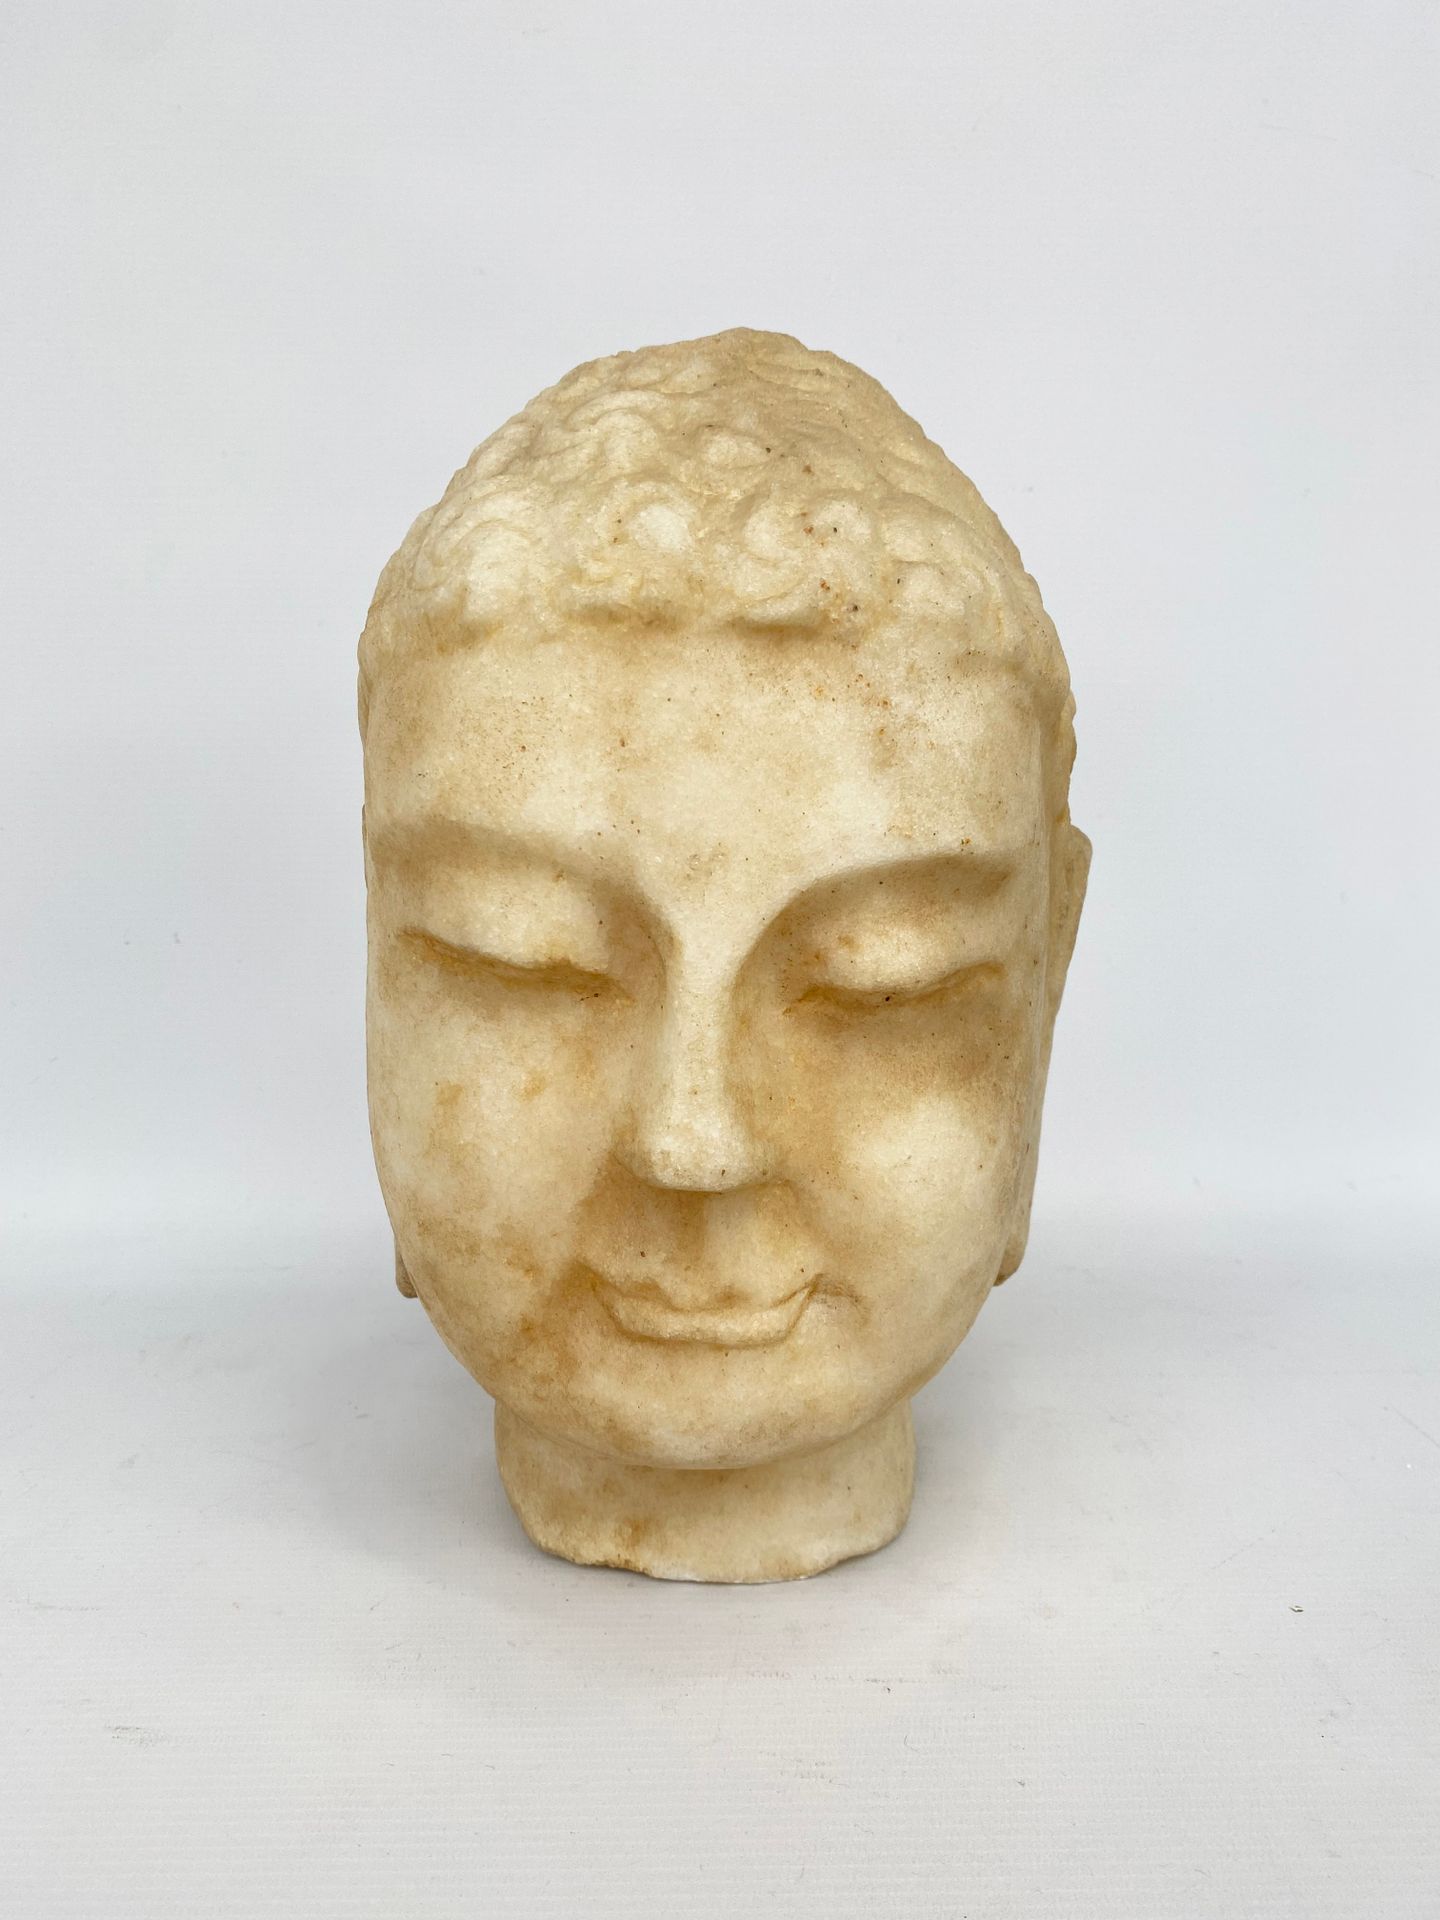 Null ASIA, 20th century

Buddha's head in carved marble.

H. 30 cm